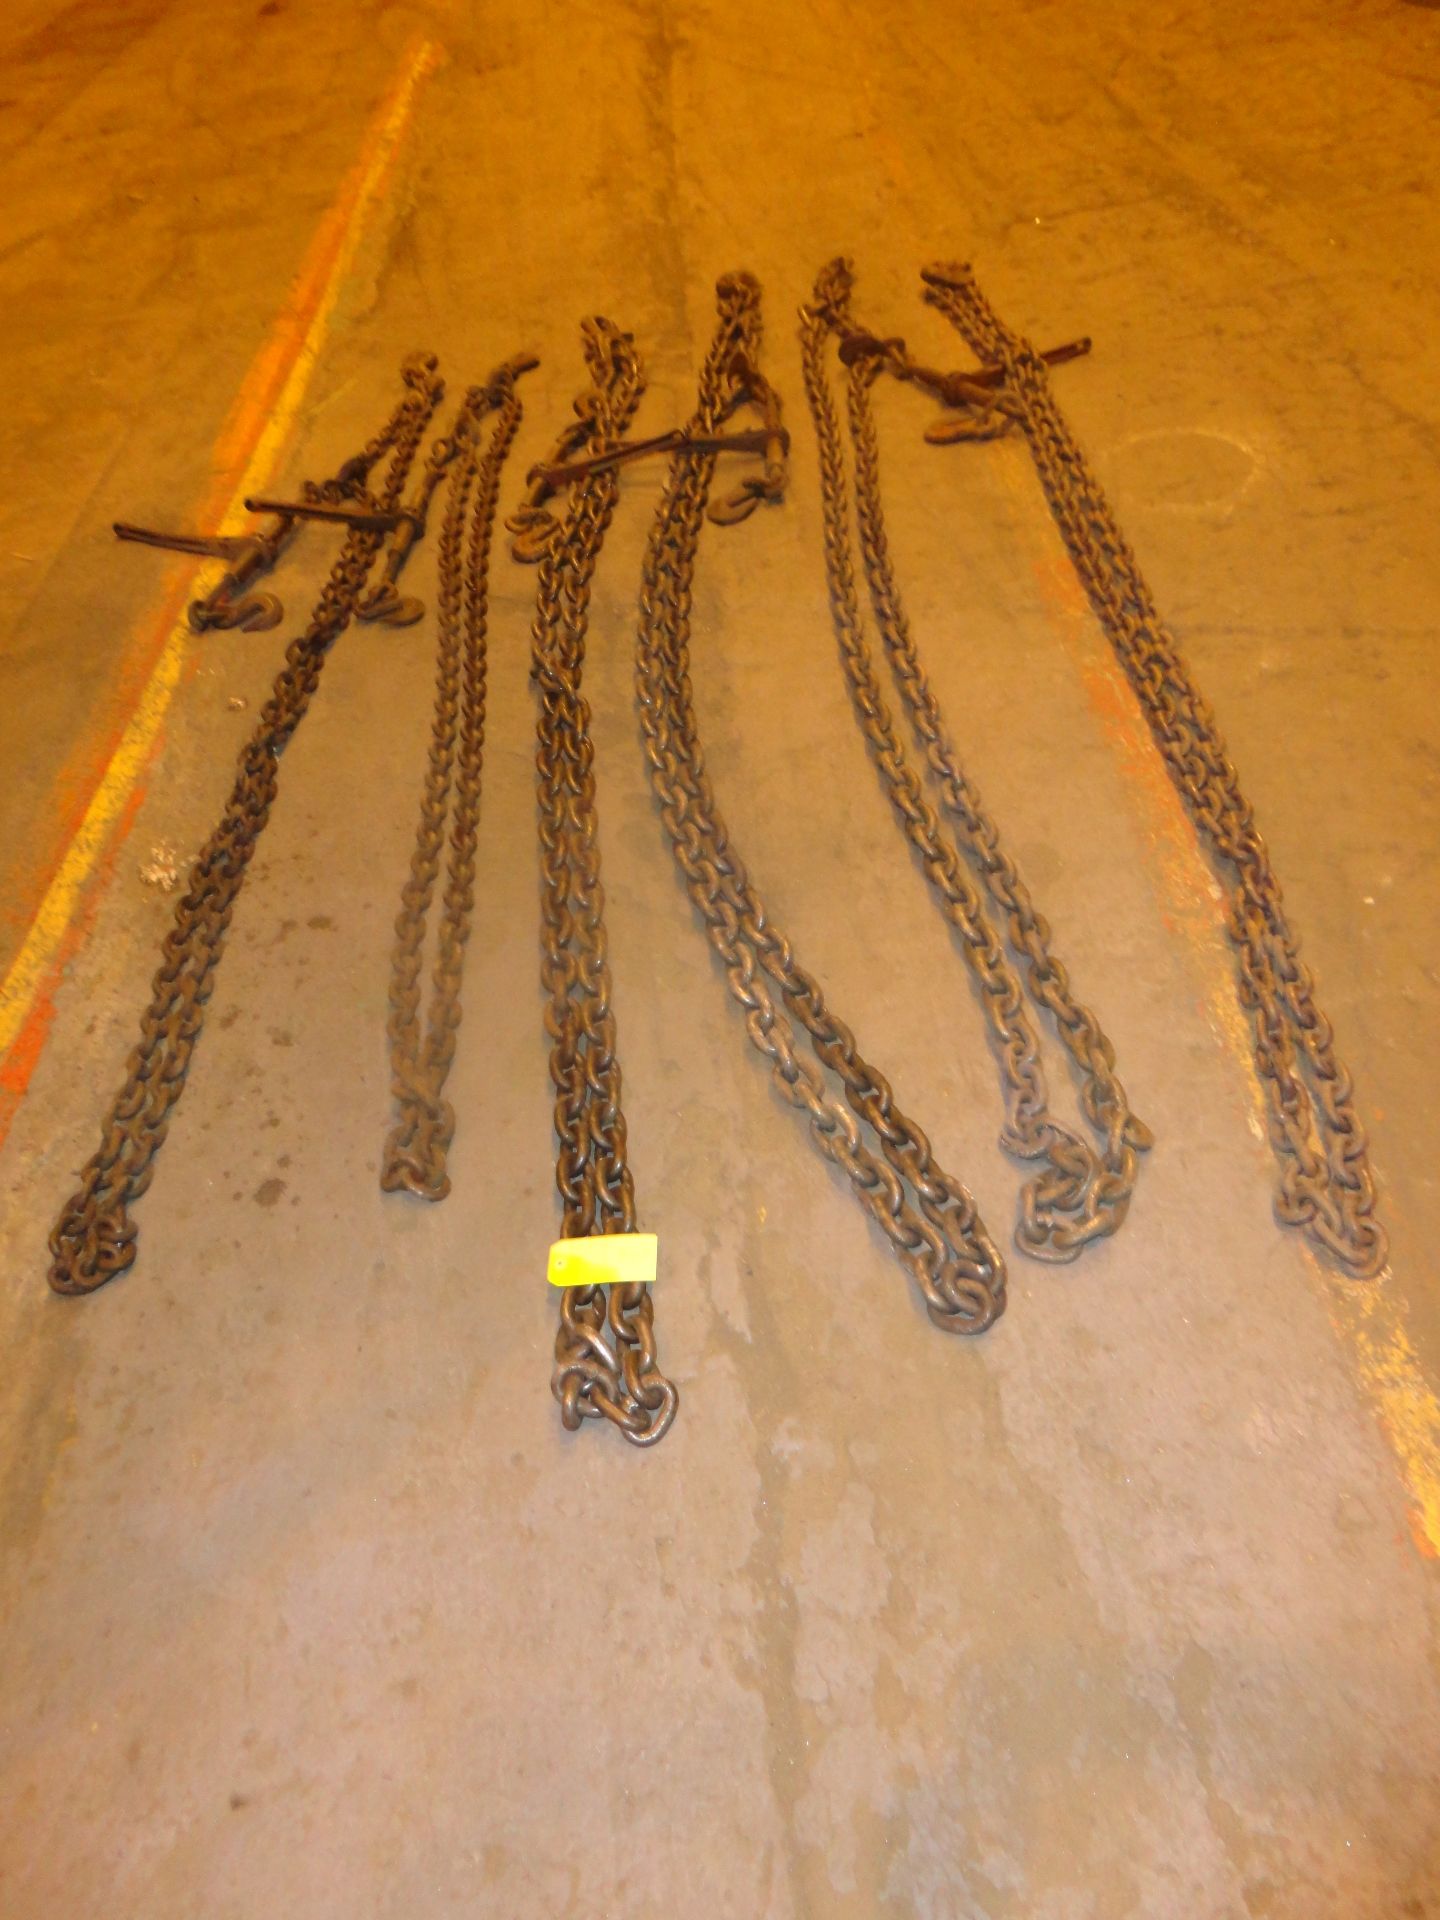 Lot of Six 5/8" and 1/2" Chains with Binders (#18) - Image 10 of 10